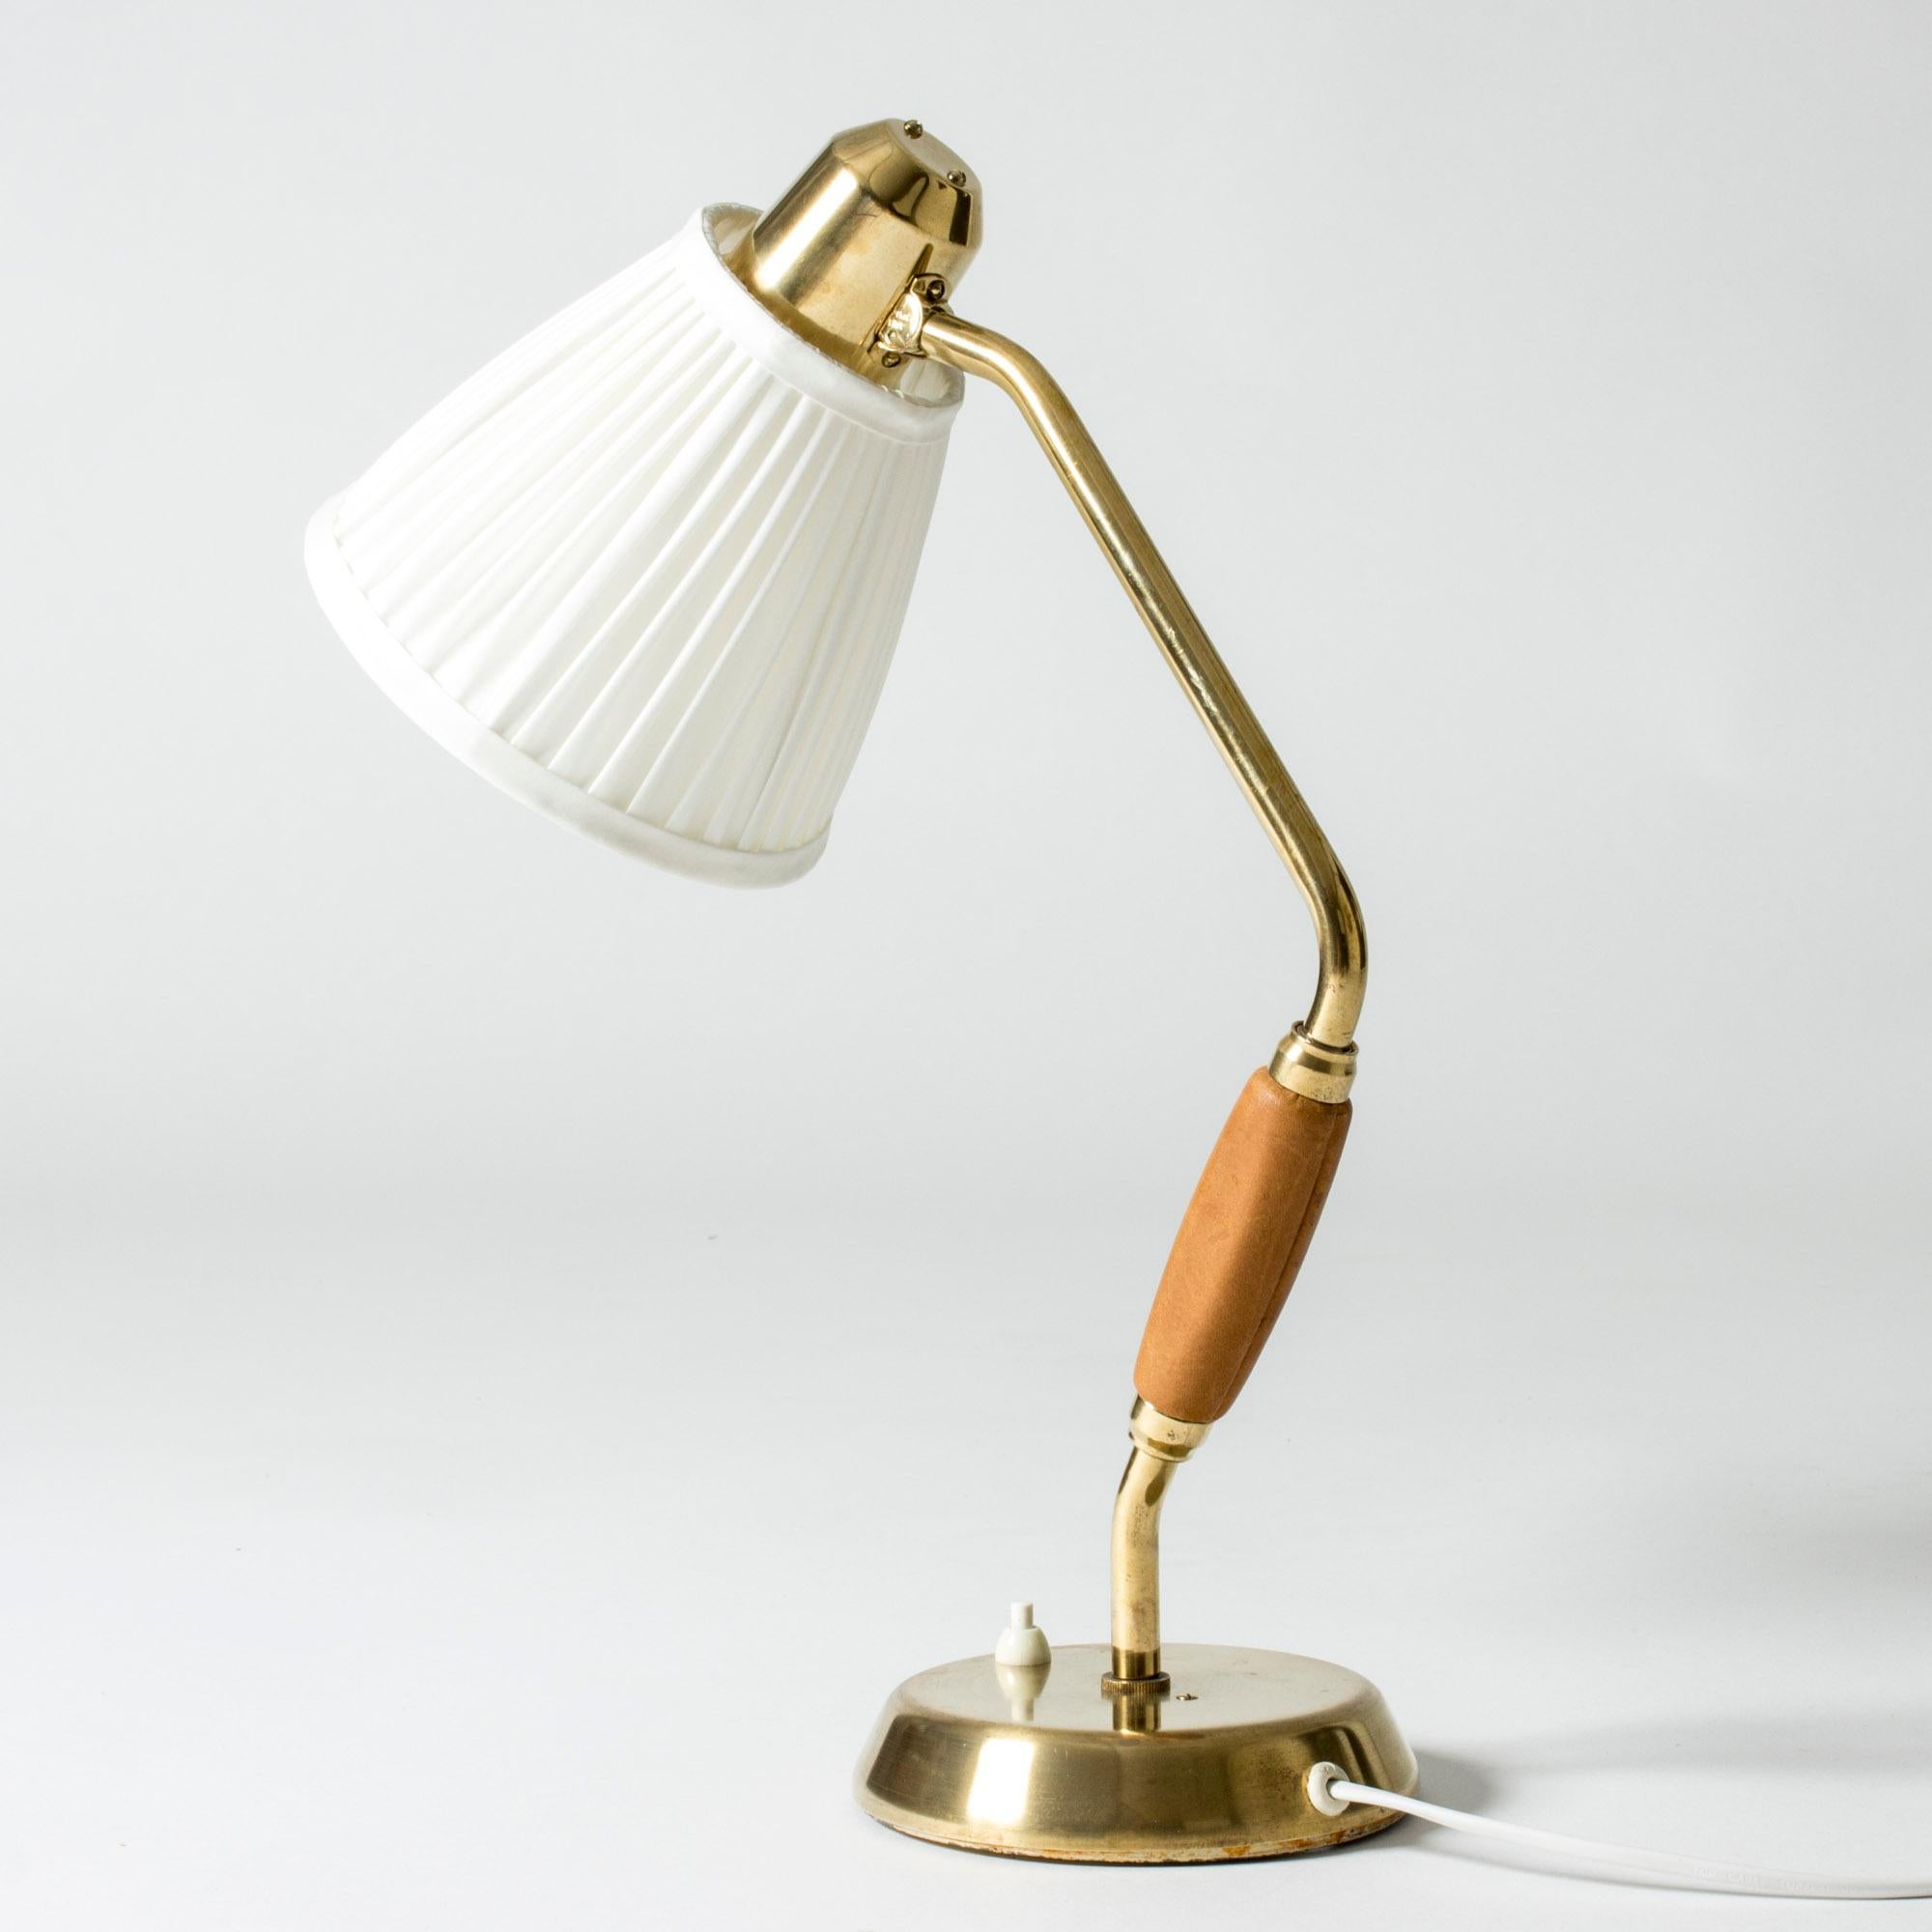 Lovely desk lamp from ASEA, made from brass with a leather dressed handle. Neat, pleated lamp shade.